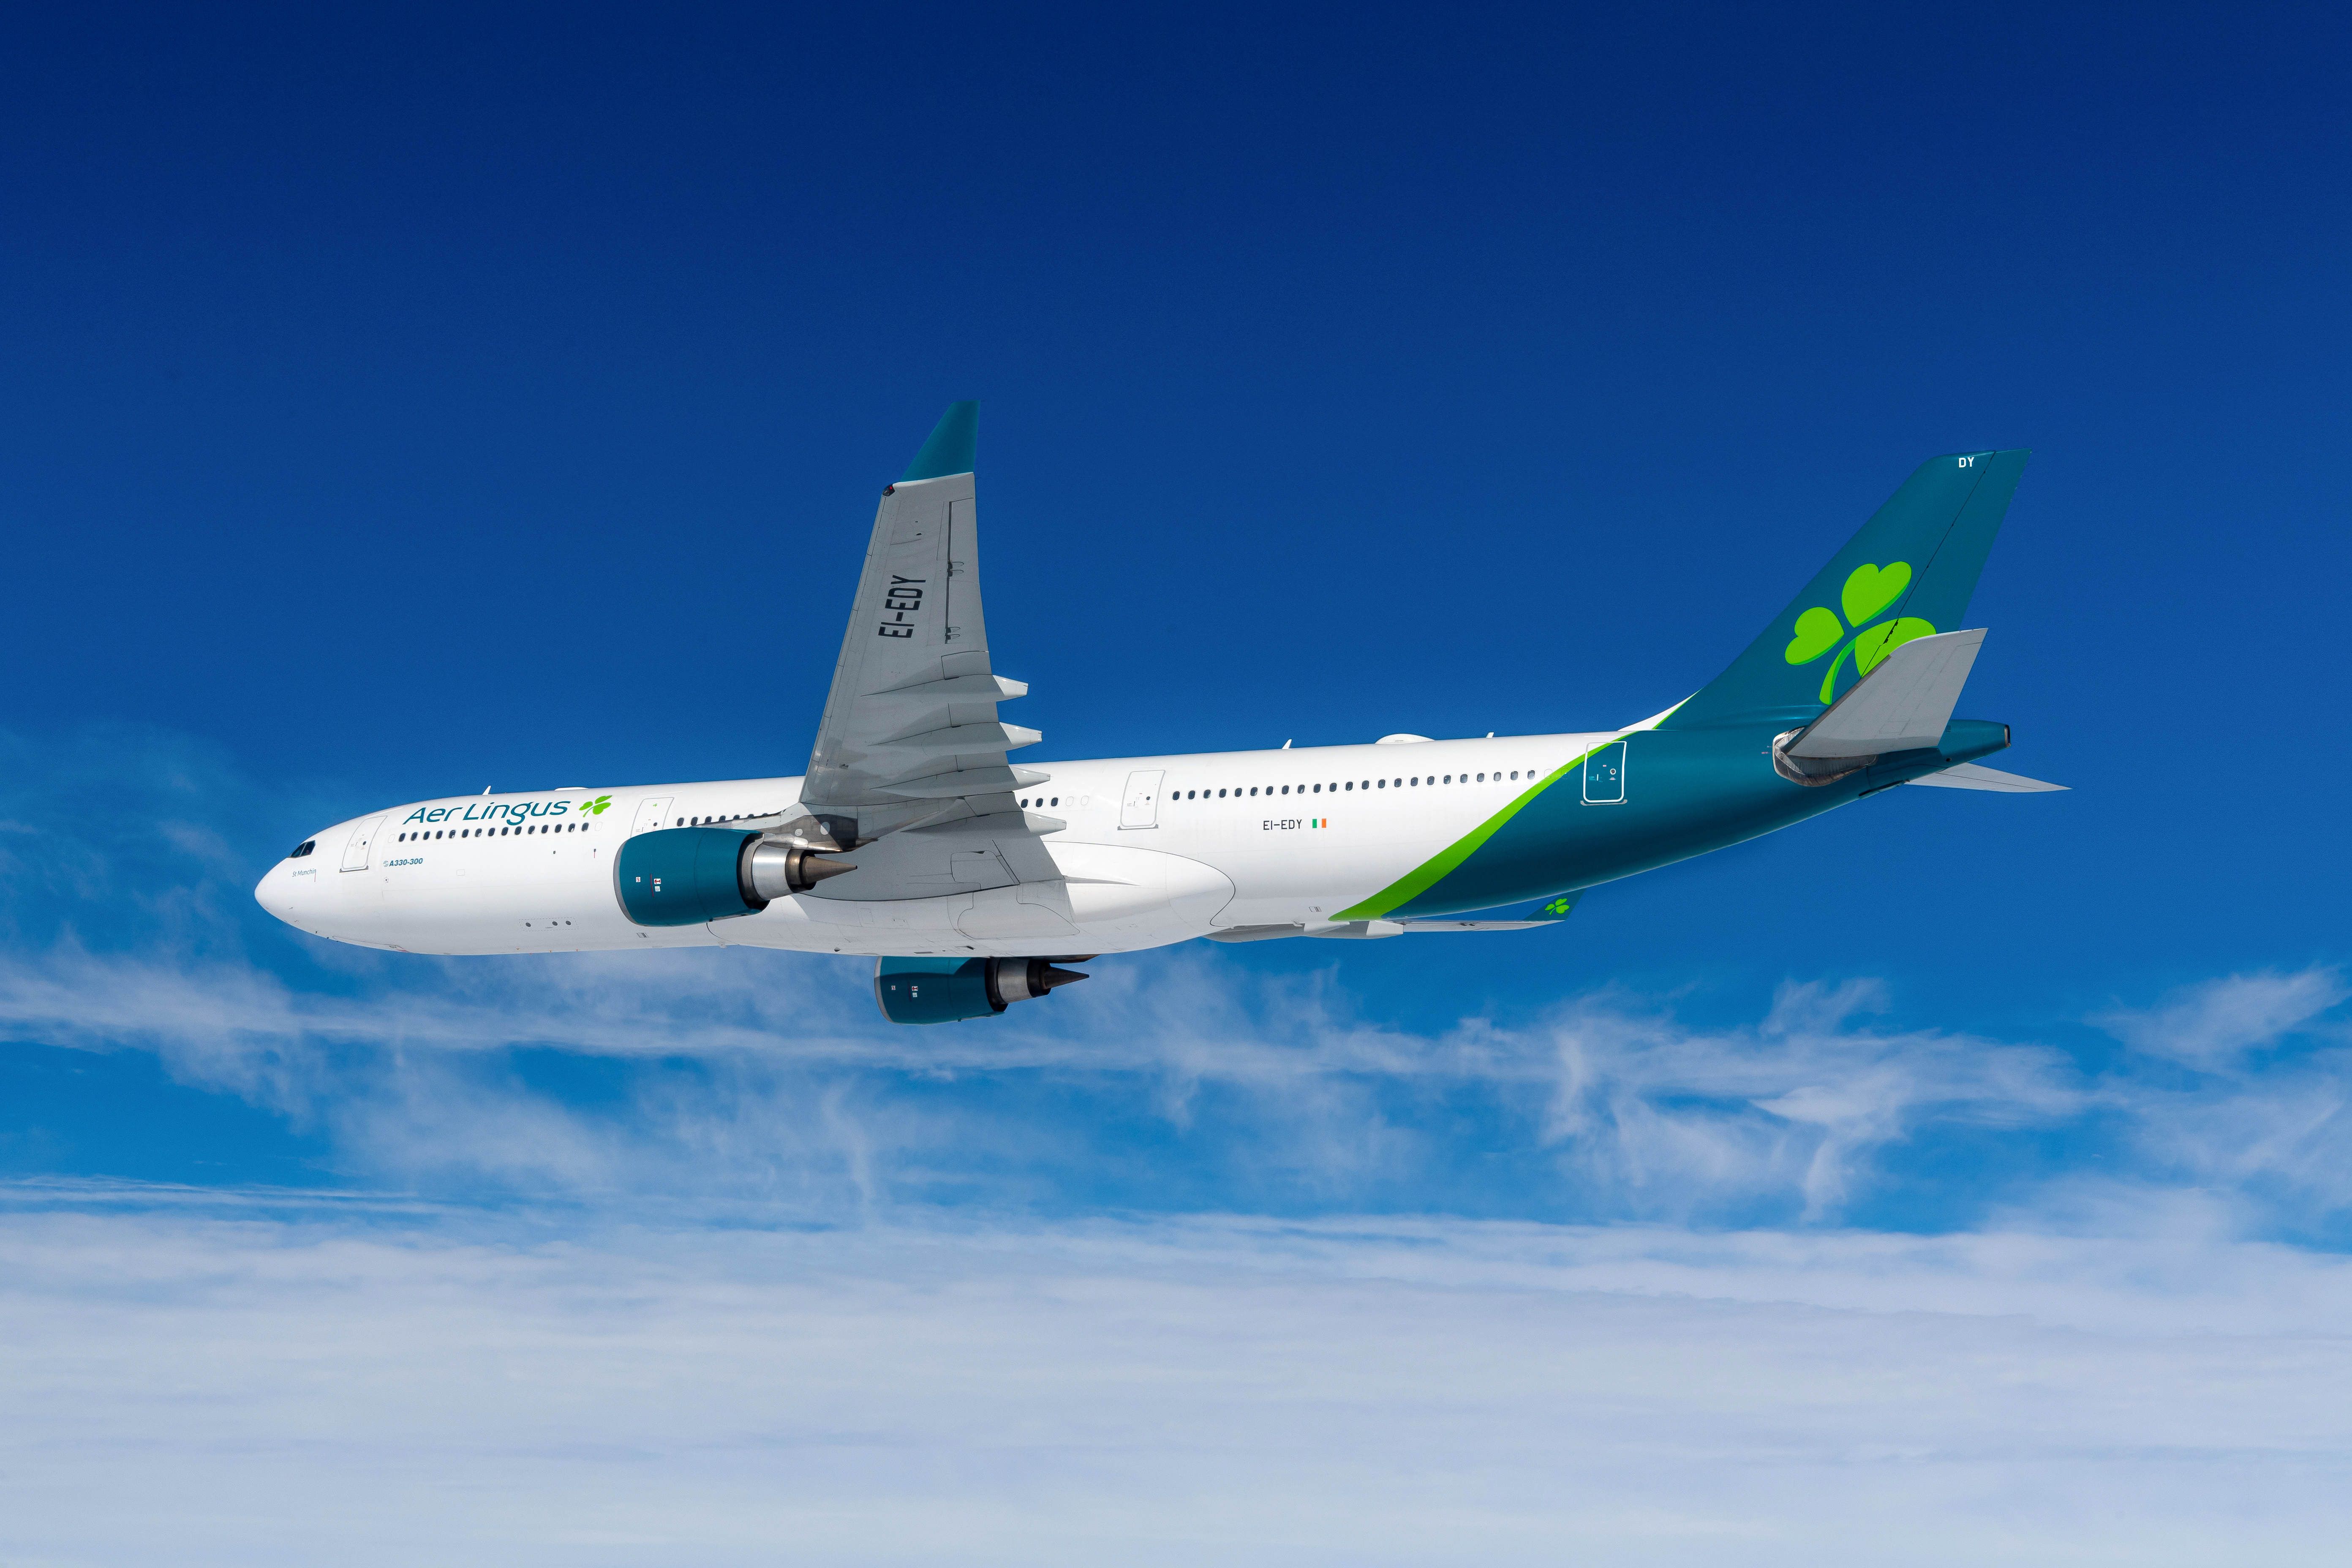 An Aer Lingus Airbus A330-300 in flight.